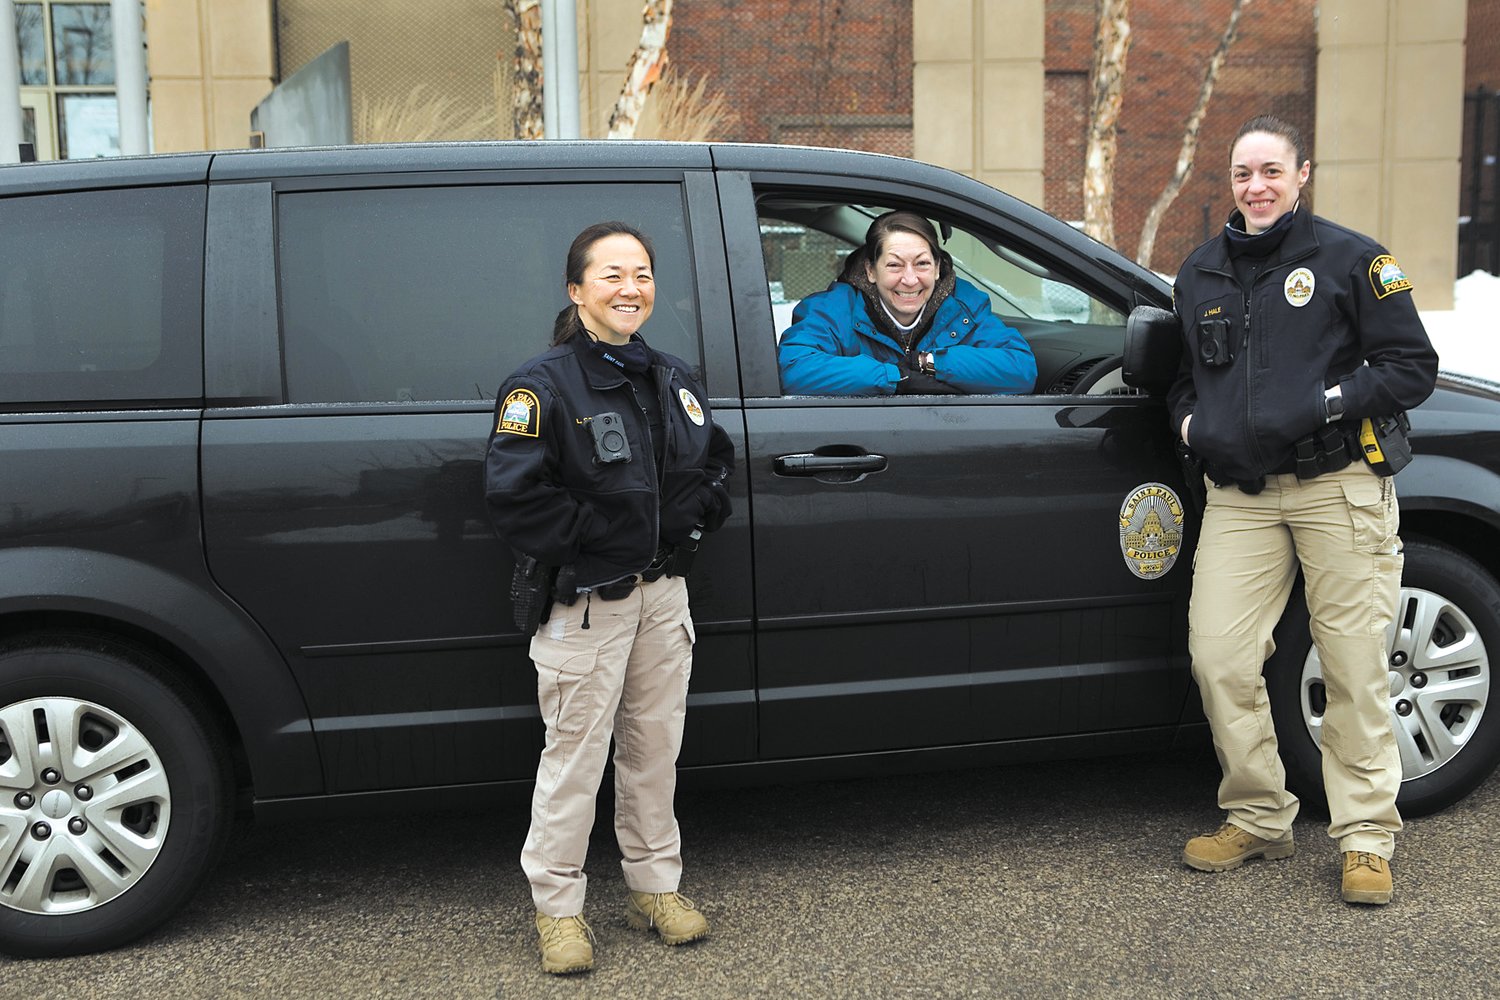 St. Paul COAST Unit members include (left to right) officer Lori Goulet, social worker Sally Vanerstrom, and officer Jen Hale. They respond to mental health calls, as well other crises. (Photo by Margie O’Loughlin)